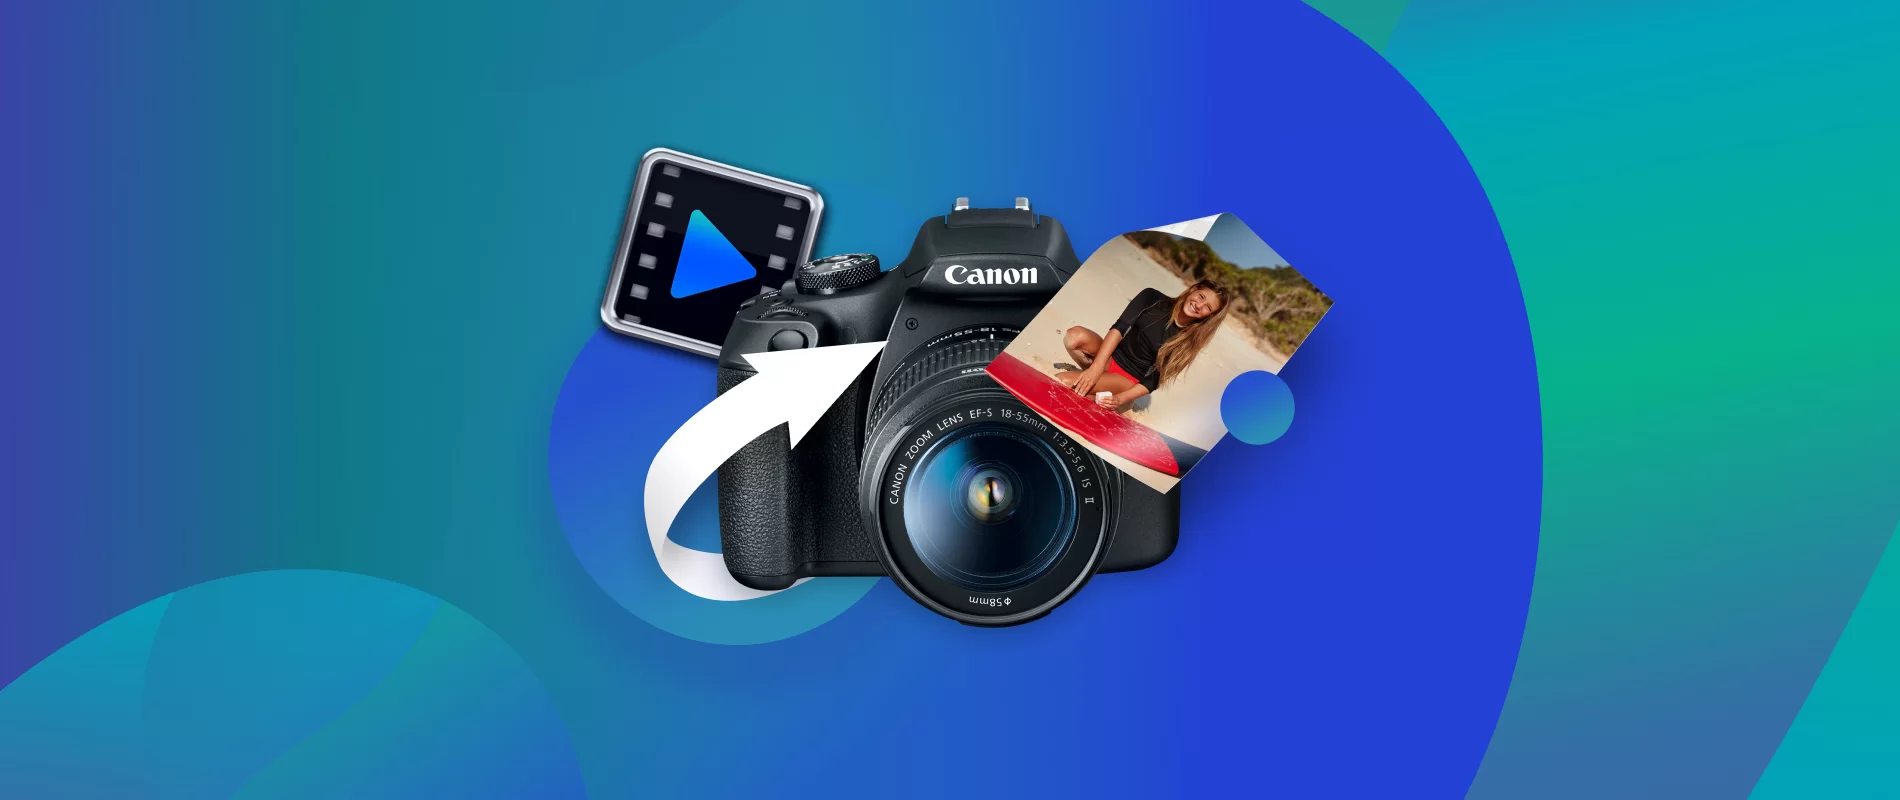 How To Restore Deleted Pictures From Digital Camera